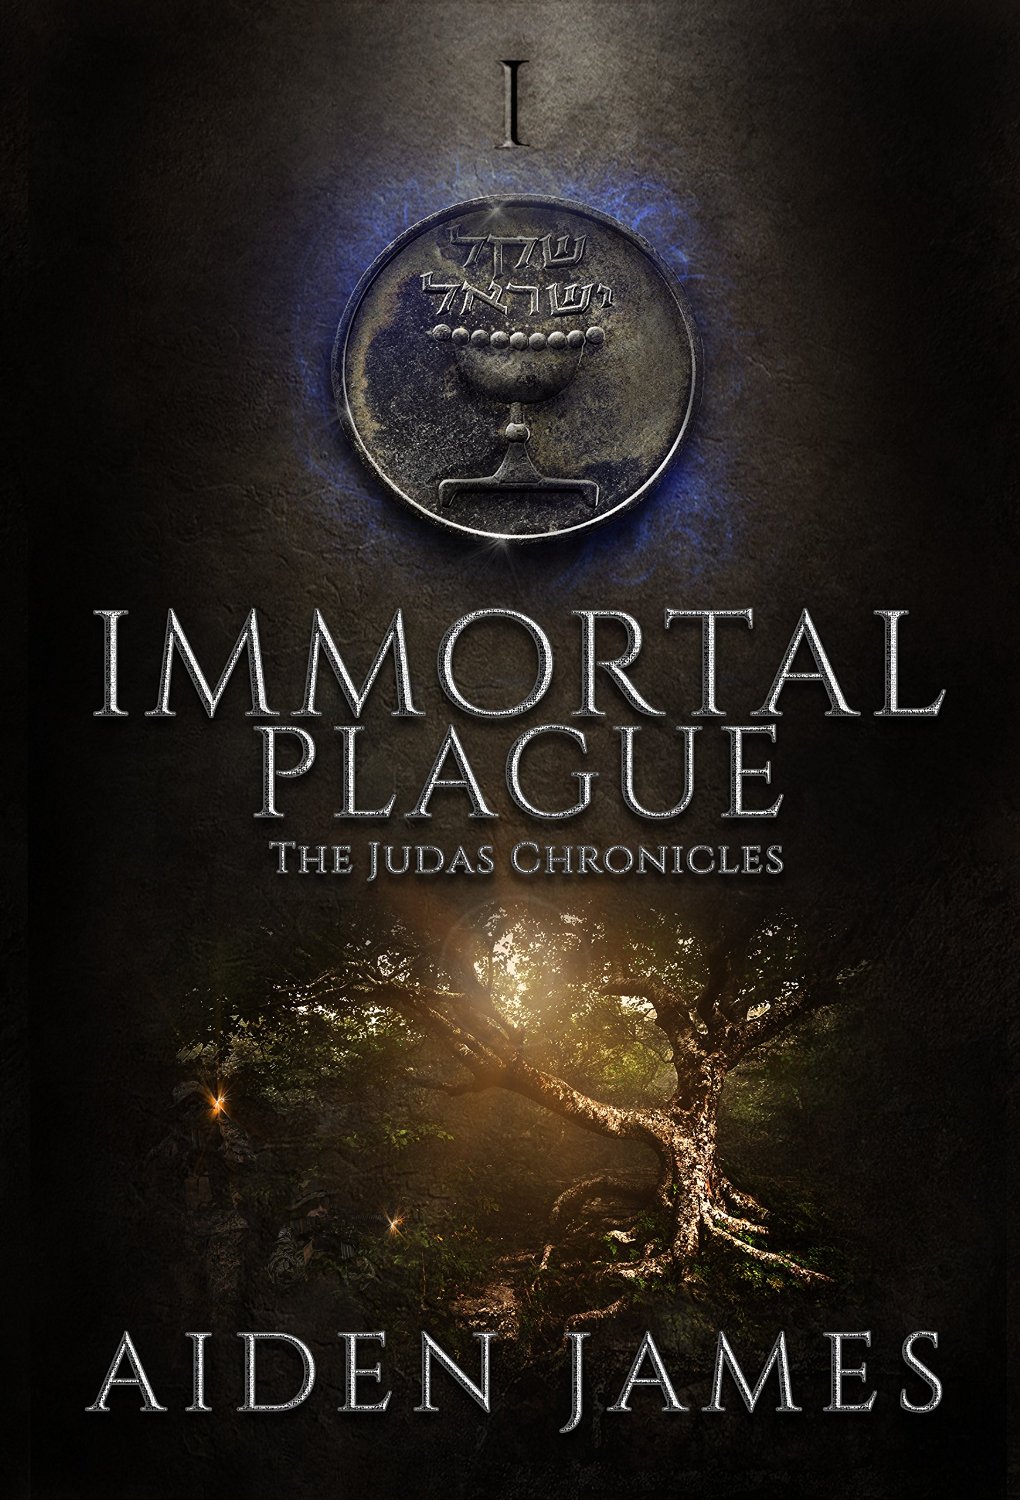 Immortal Plague (The Judas Chronicles Book 1) by Aiden James